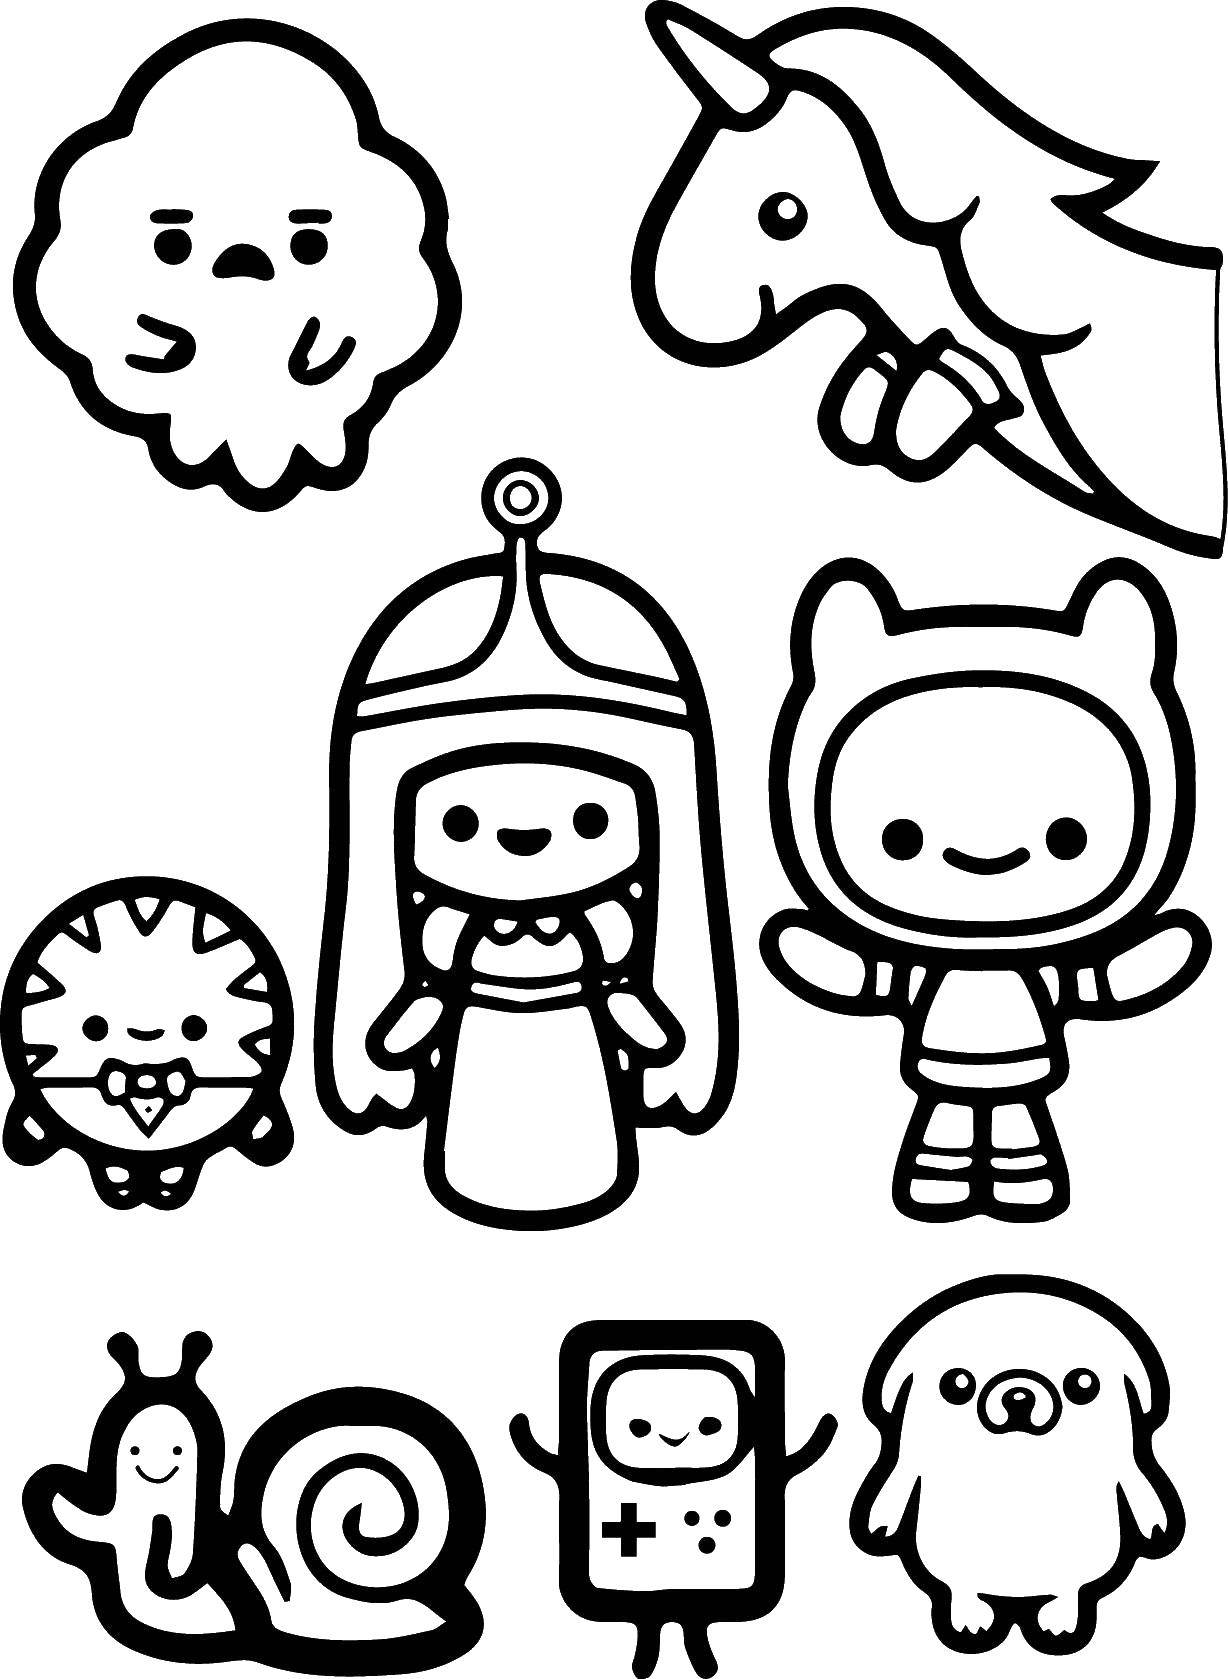 Coloring The characters of adventure time. Category adventure time. Tags:  heroes , cartoons, adventure time.